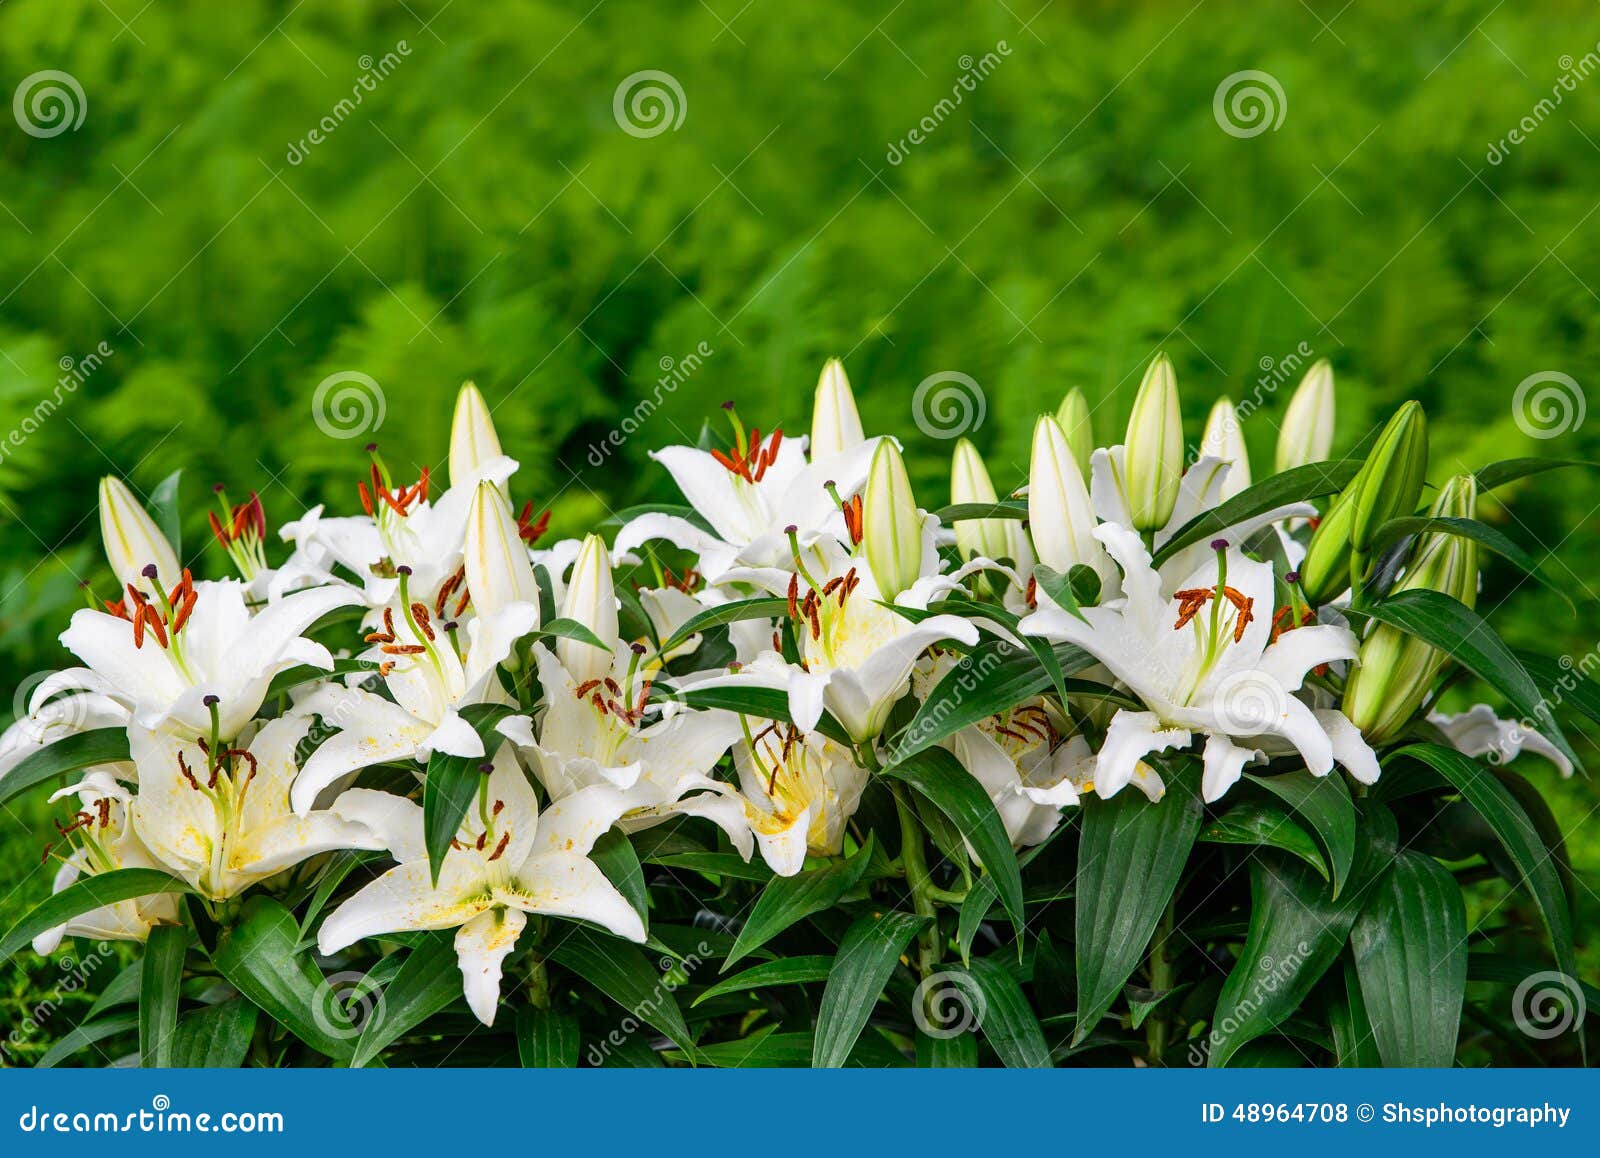 easter lilies and ferns in a lush green garden